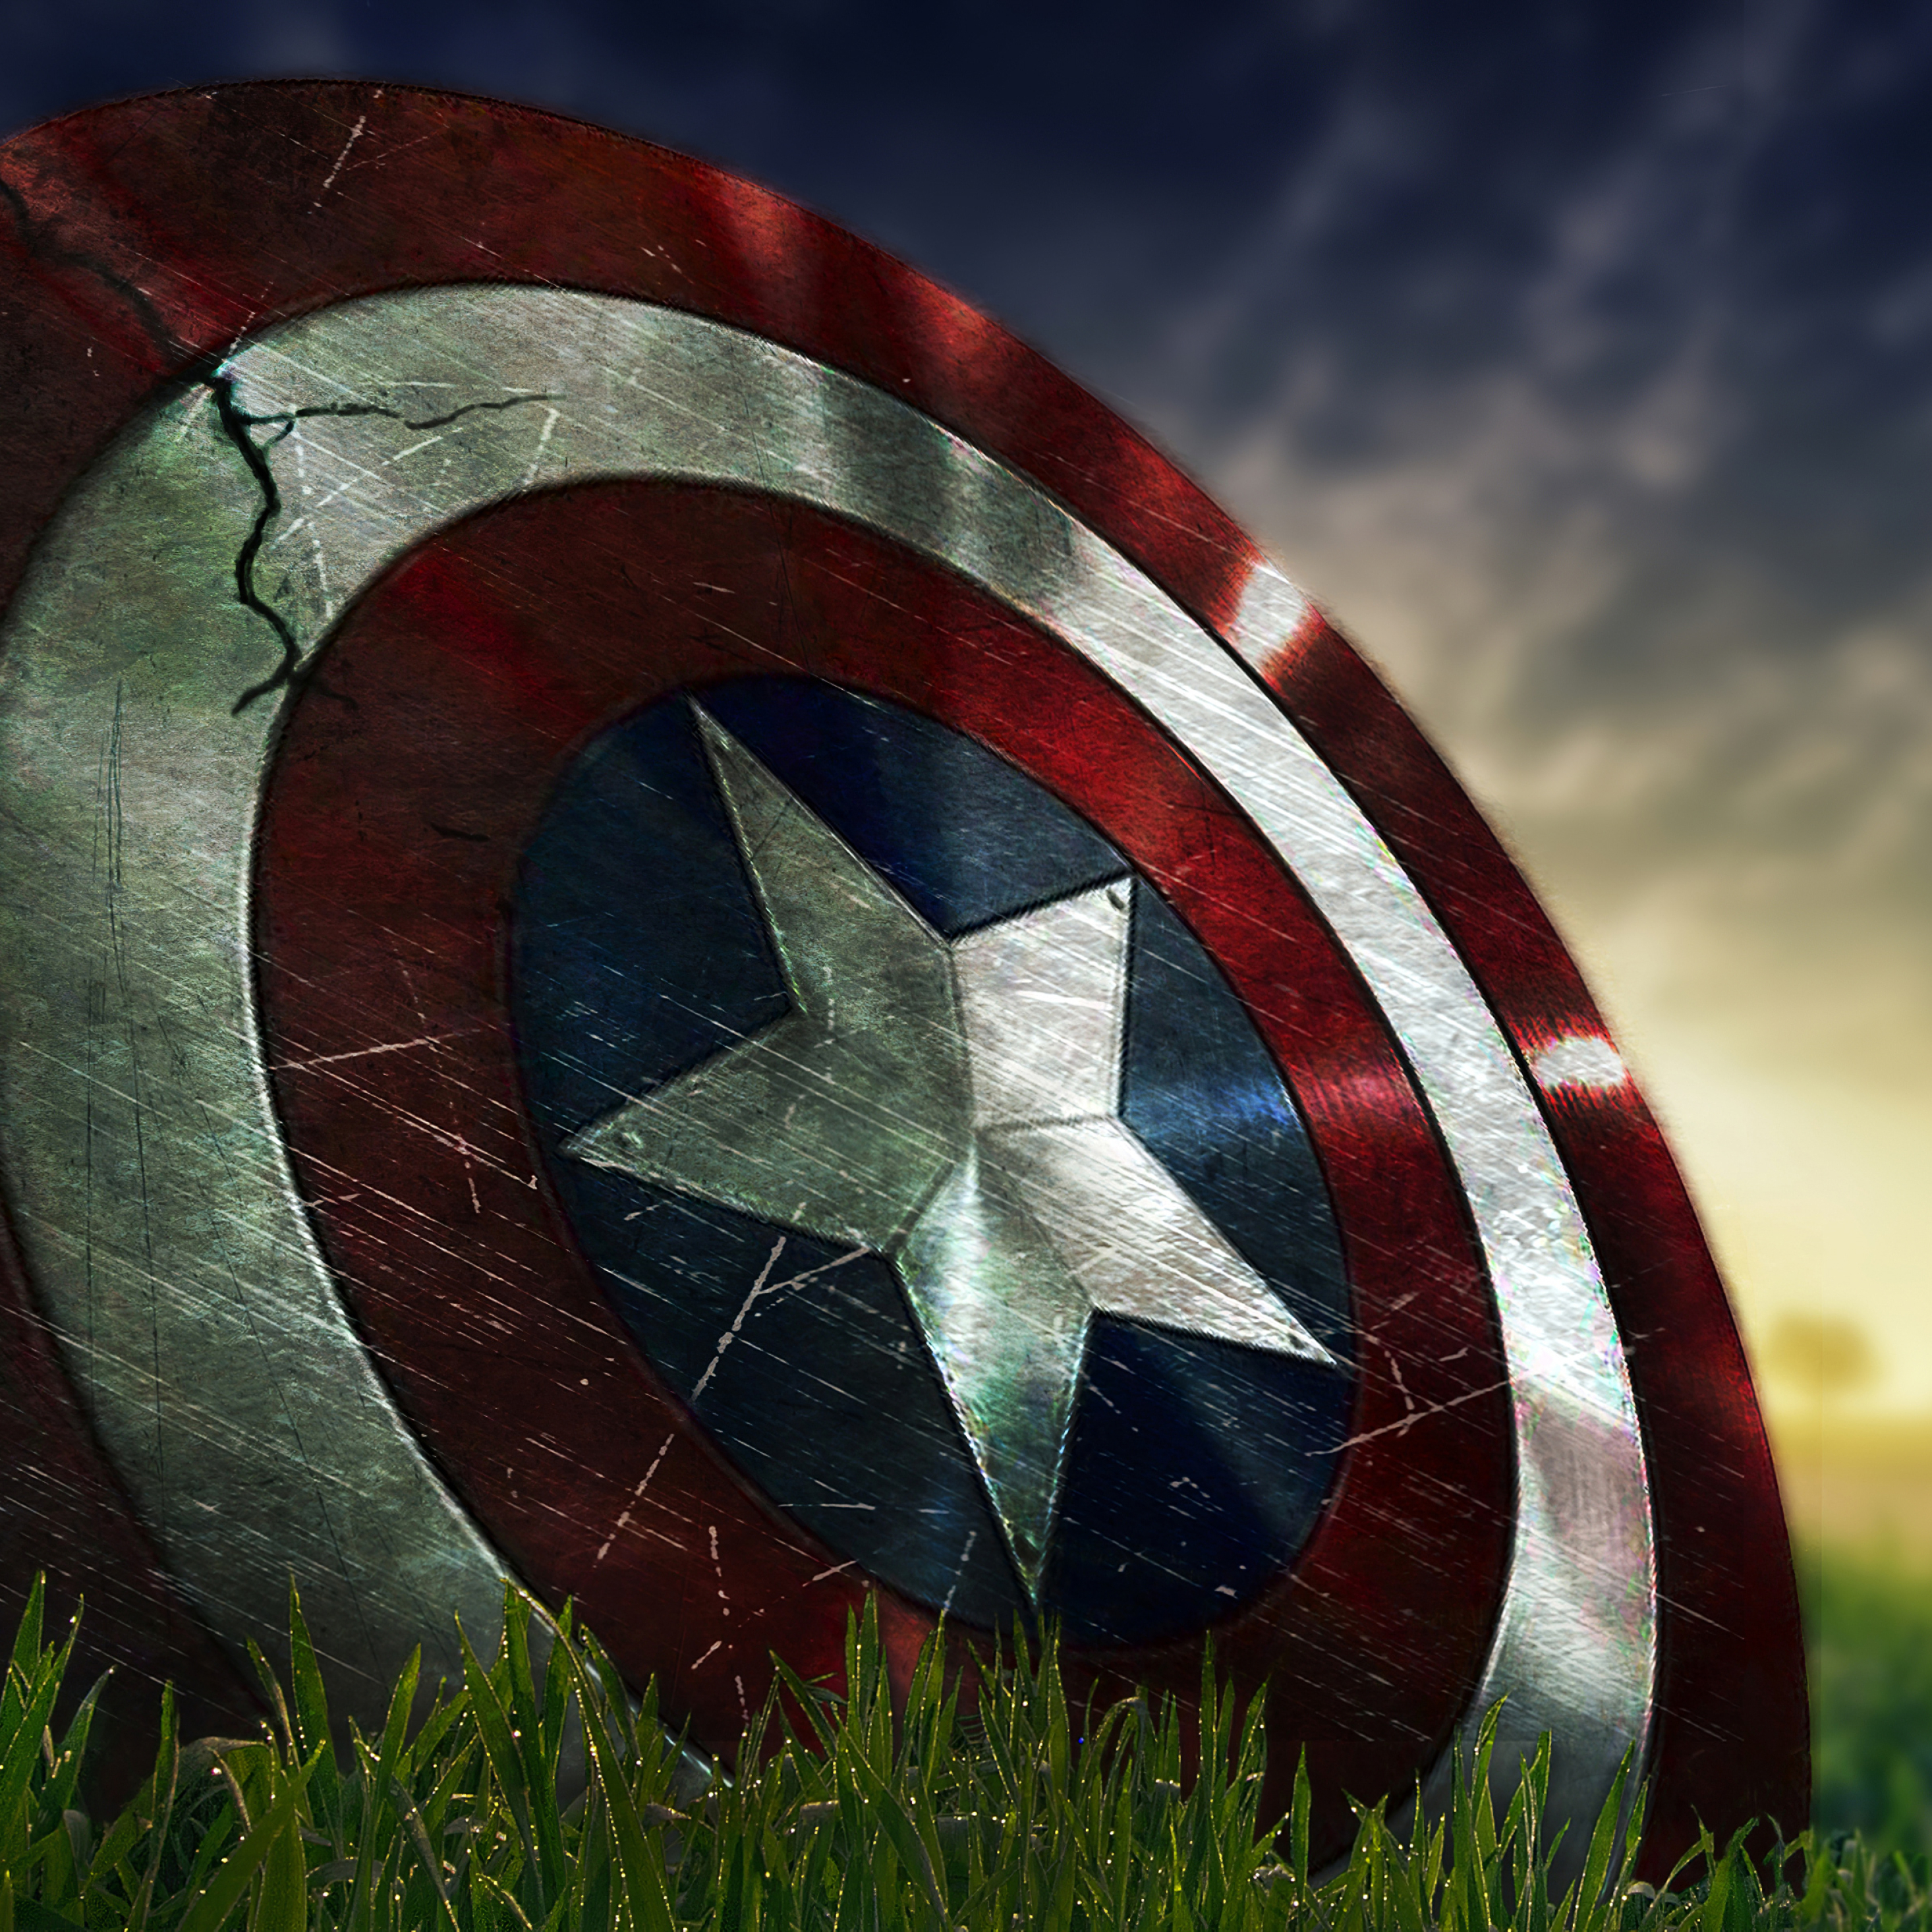 2932x2932 Captain America Shield Fortnite Ipad Pro Retina Display Wallpaper Hd Games 4k Wallpapers Images Photos And Background